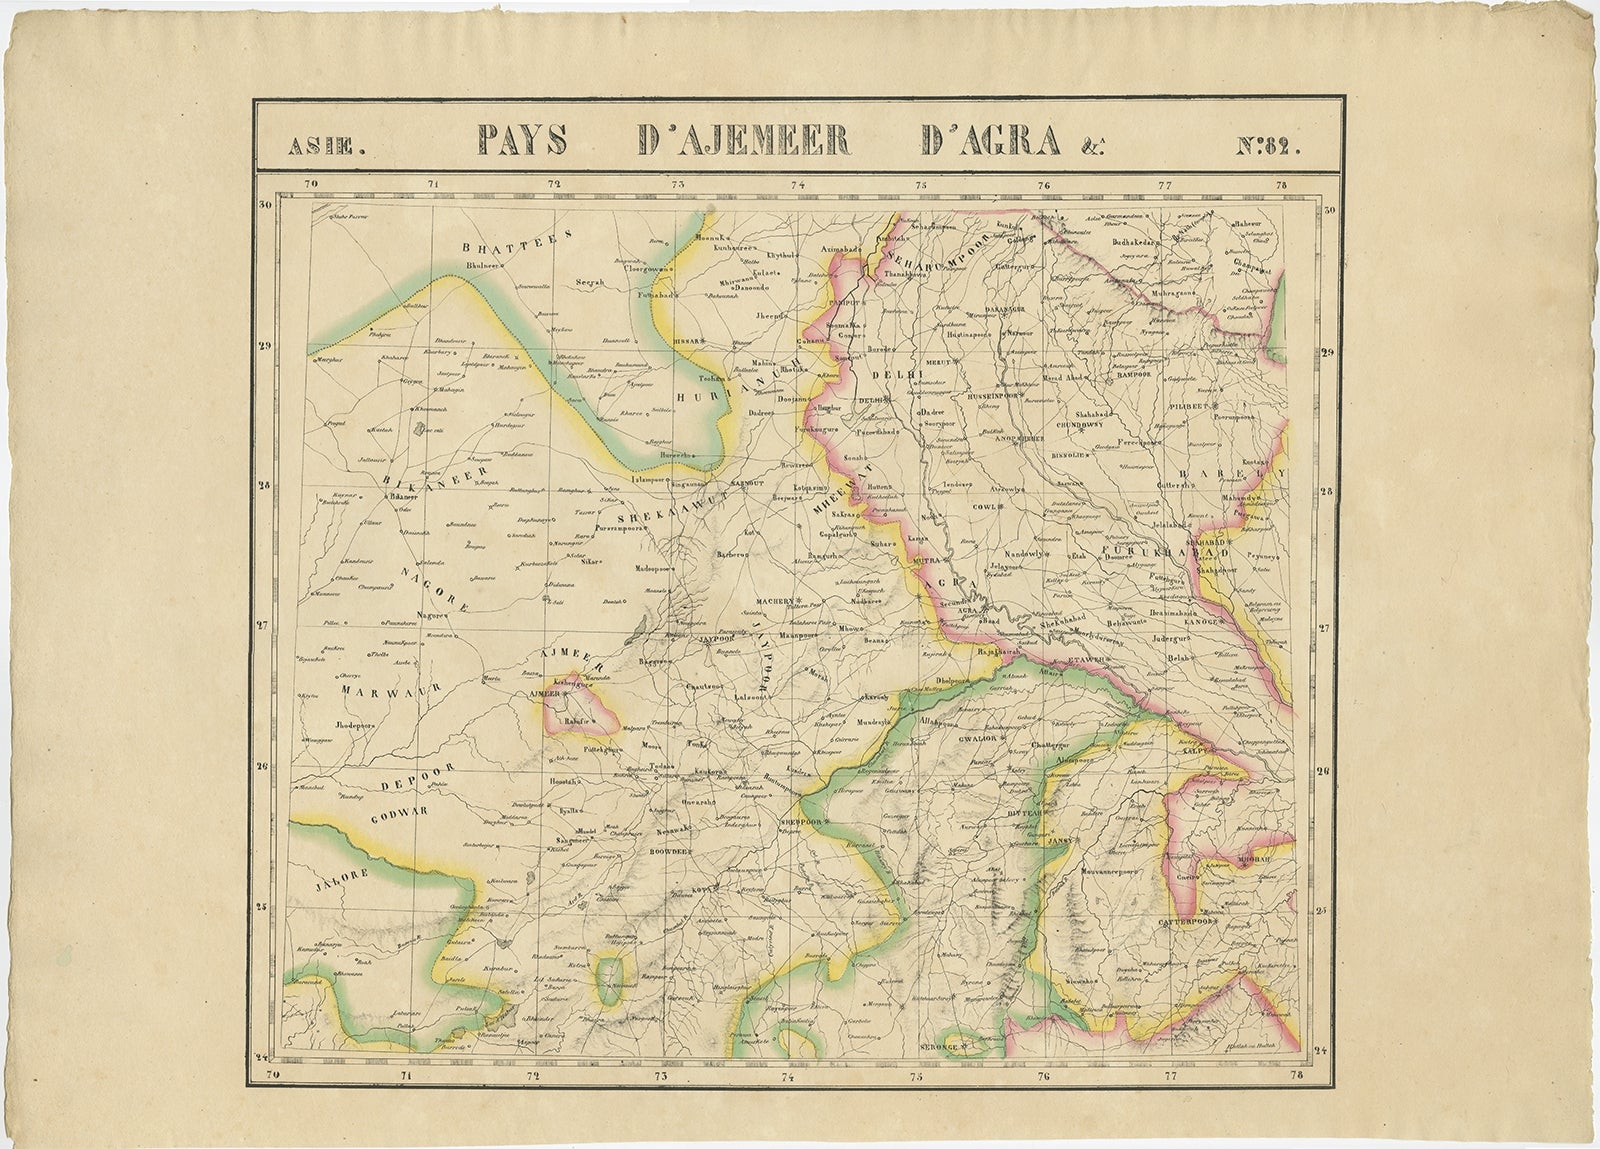 Antique map titled 'No. 82 Pays d'Ajemeer d'Agra'. Detailed map of Northern India. Originates from 'Atlas Universel' by P.M. Vandermaelen. 

Artists and Engravers: Philippe Marie Vandermaelen (1795-1869) was a Belgian cartographer and geographer